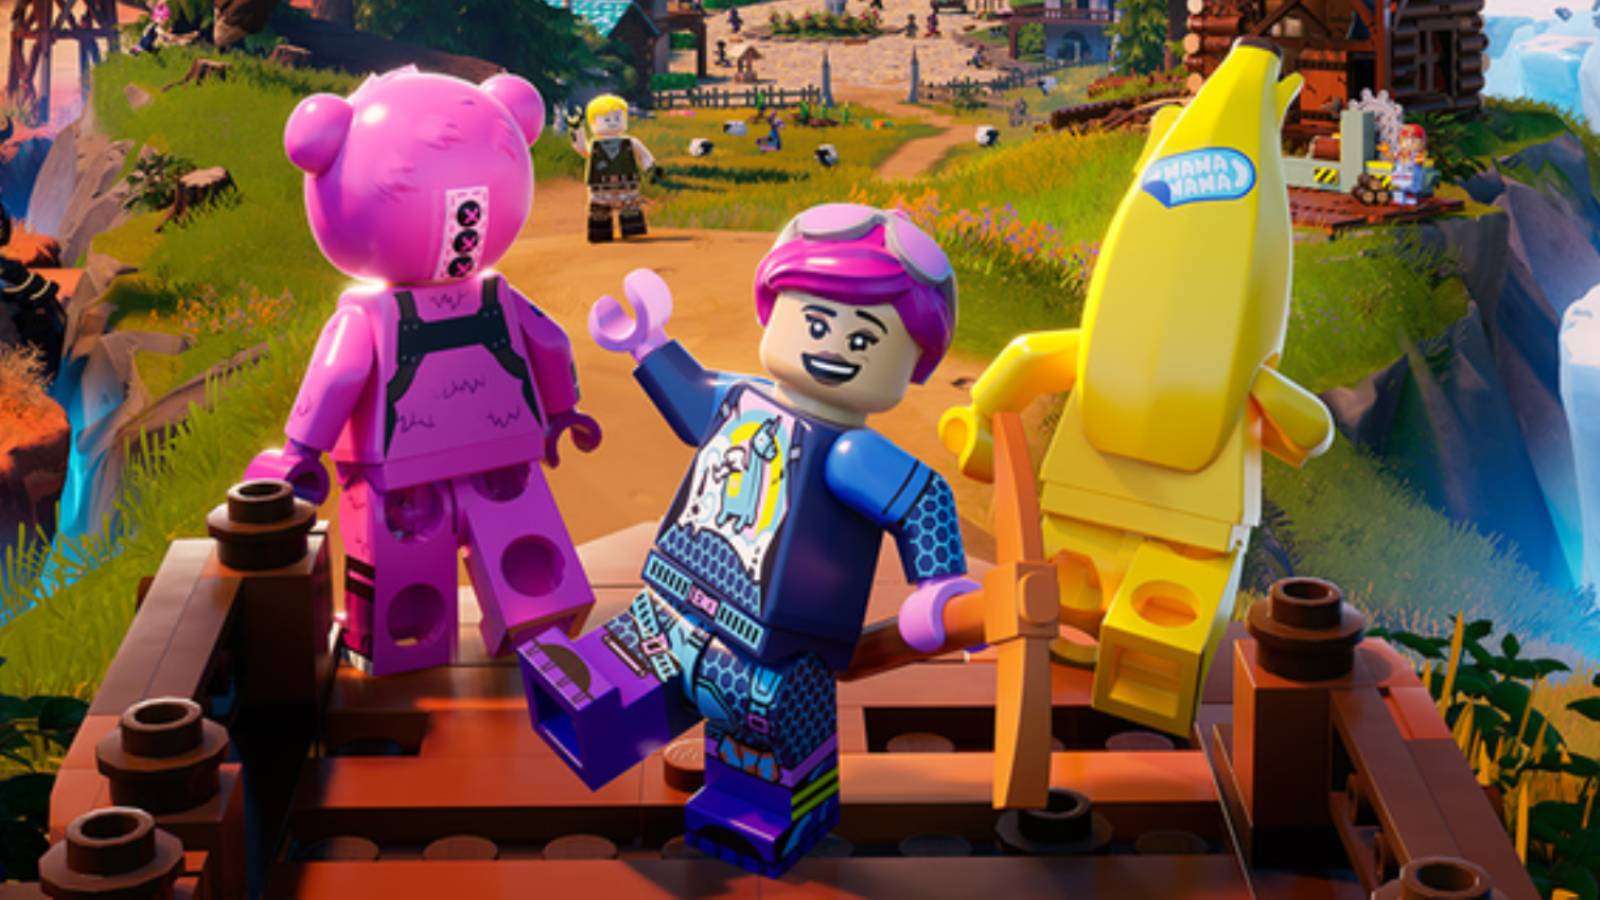 LEGO Fortnite promotional image for the game.